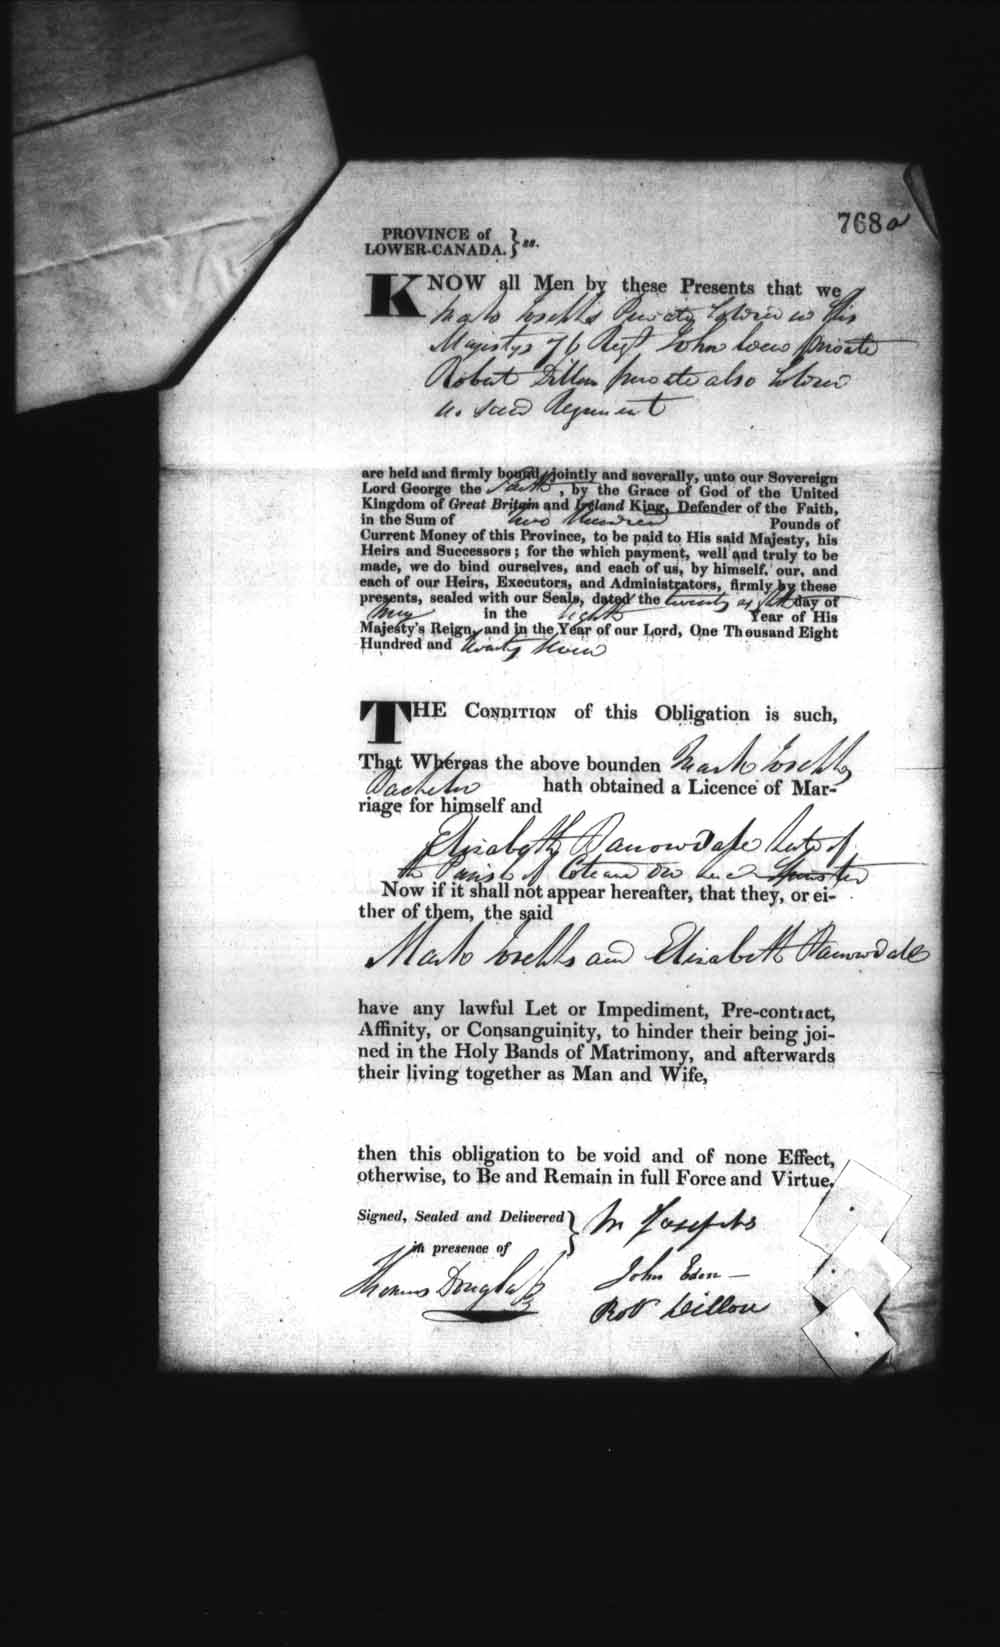 Digitized page of Upper and Lower Canada Marriage Bonds (1779-1865) for Image No.: e008236839